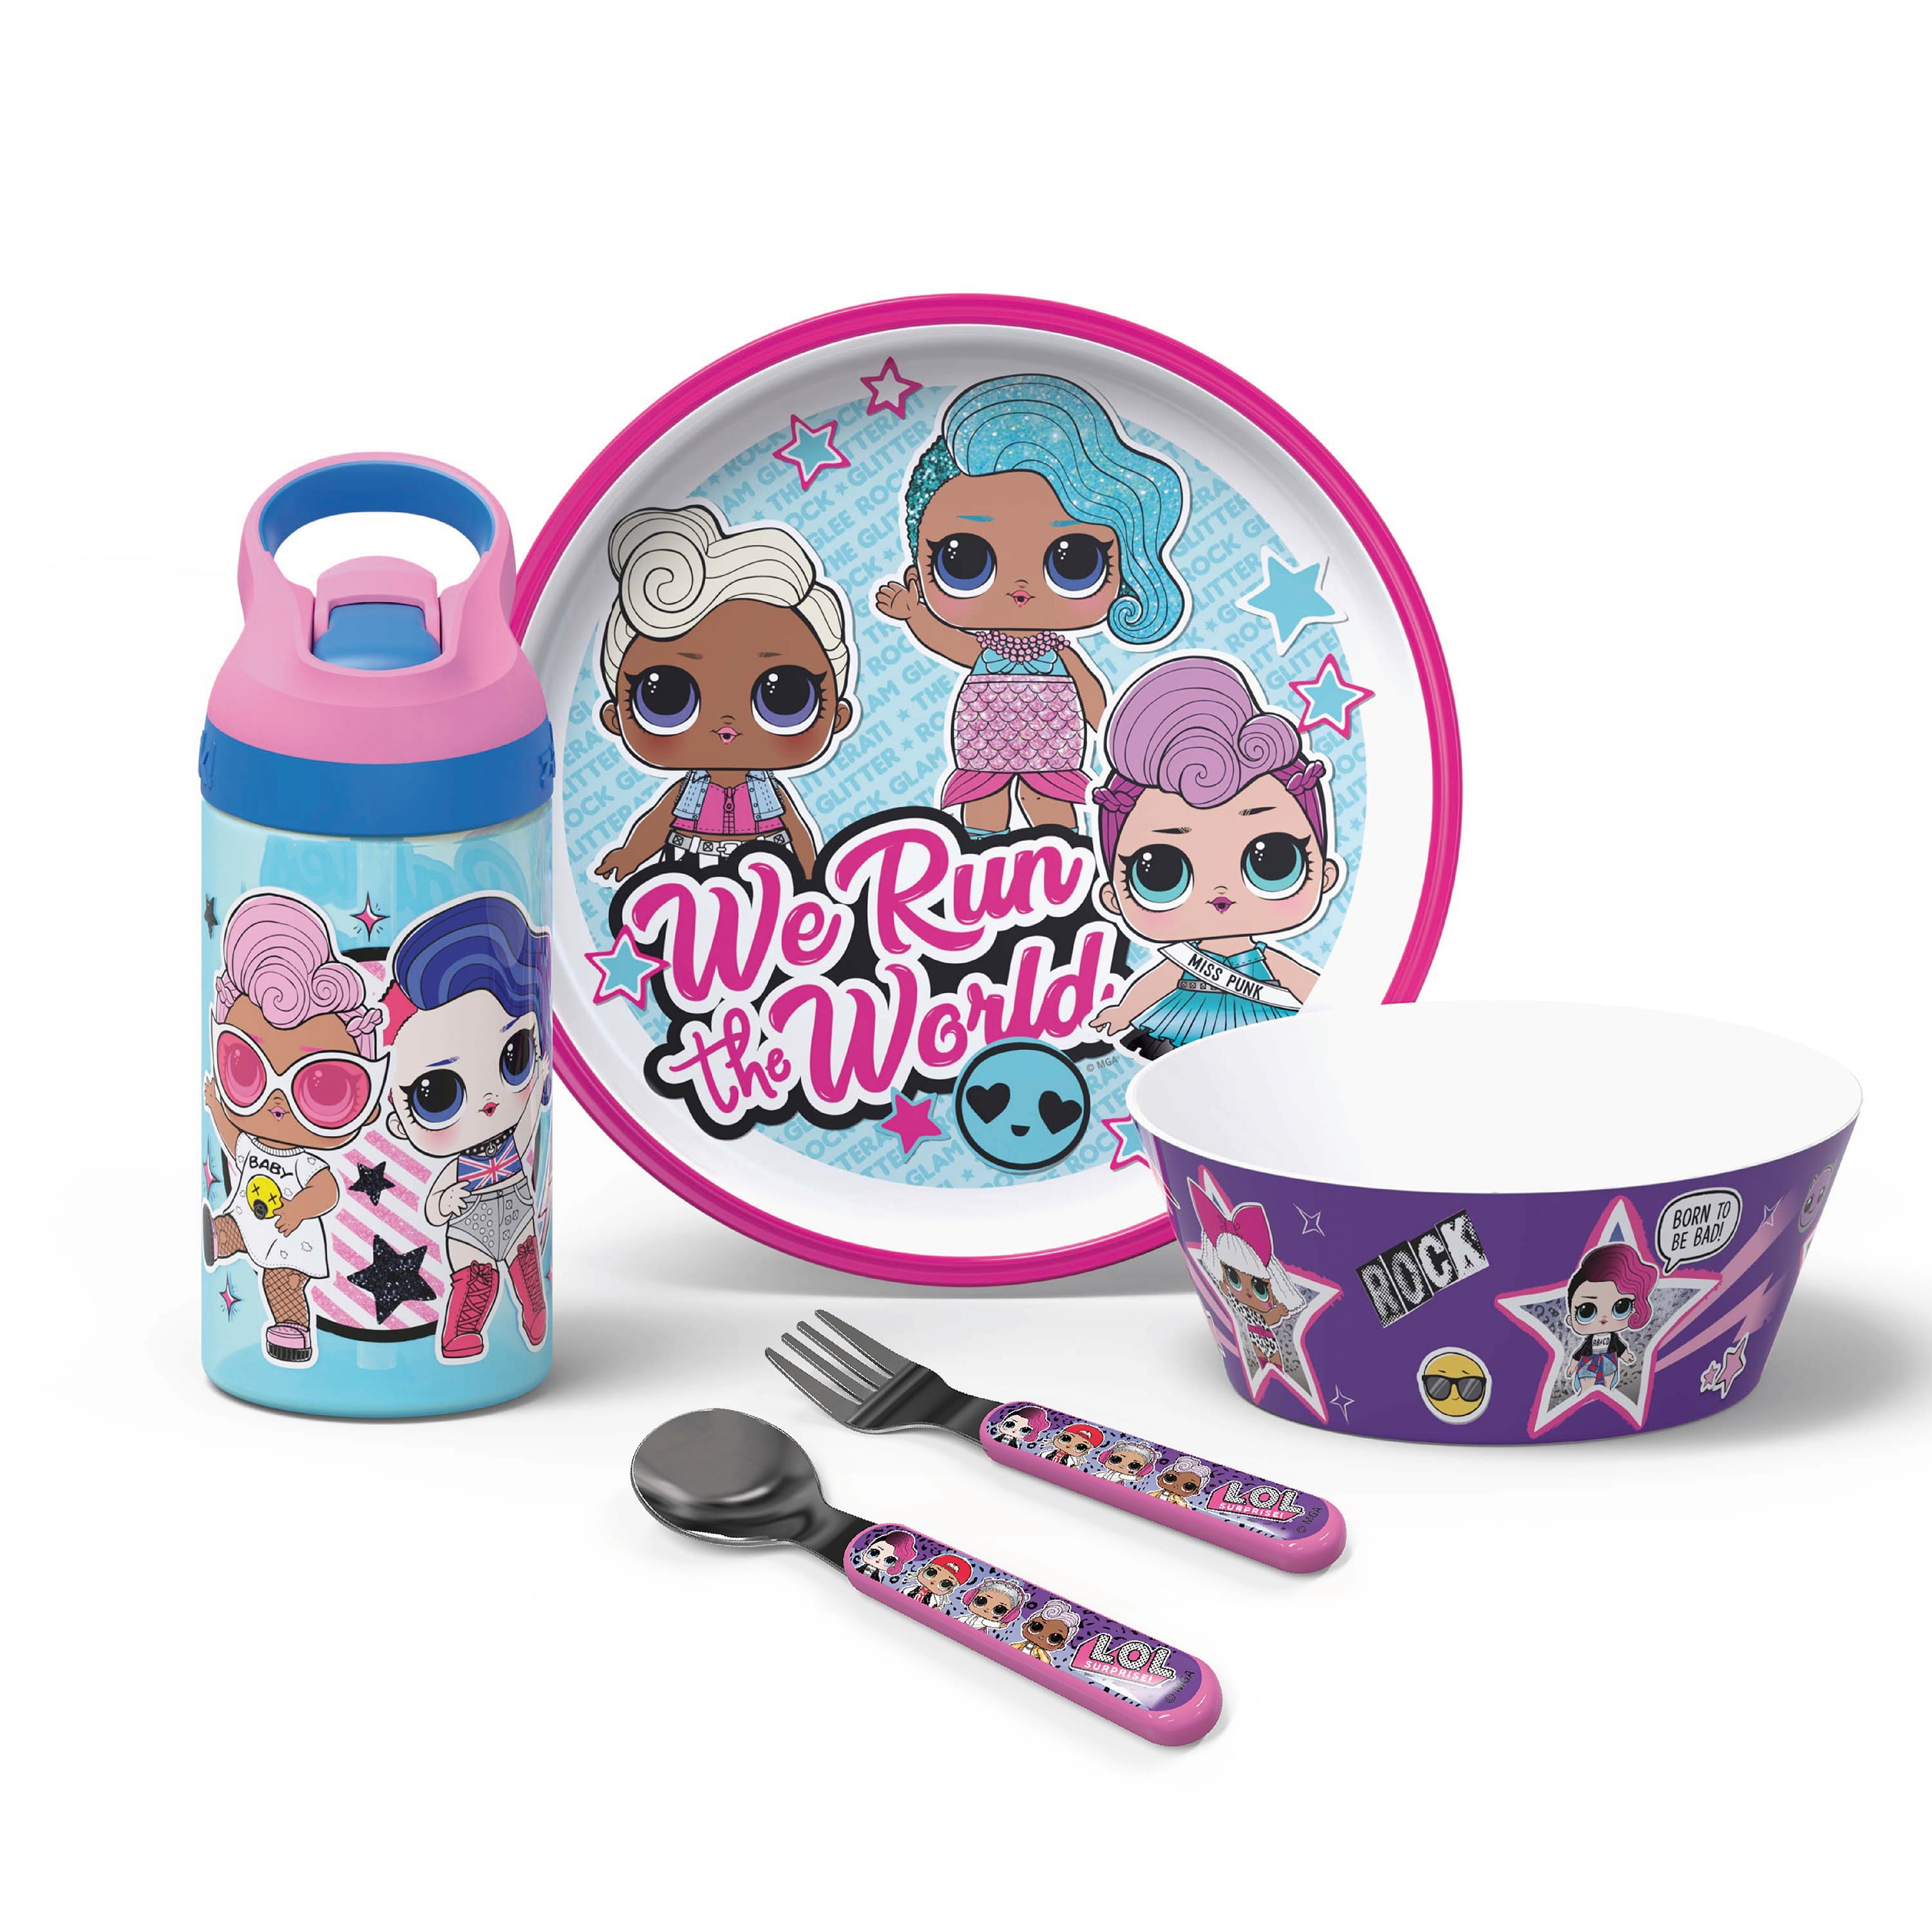 Dempsey moron Clothes Zak Designs L.O.L. Surprise! Dinnerware Set for Kids, Includes Plate, Bowl,  Water Bottle and Fork and Spoon Flatware, Made of Durable Plastic and 18/8  Stainless Steel (BPA Free, 5-Piece Set) - Walmart.com